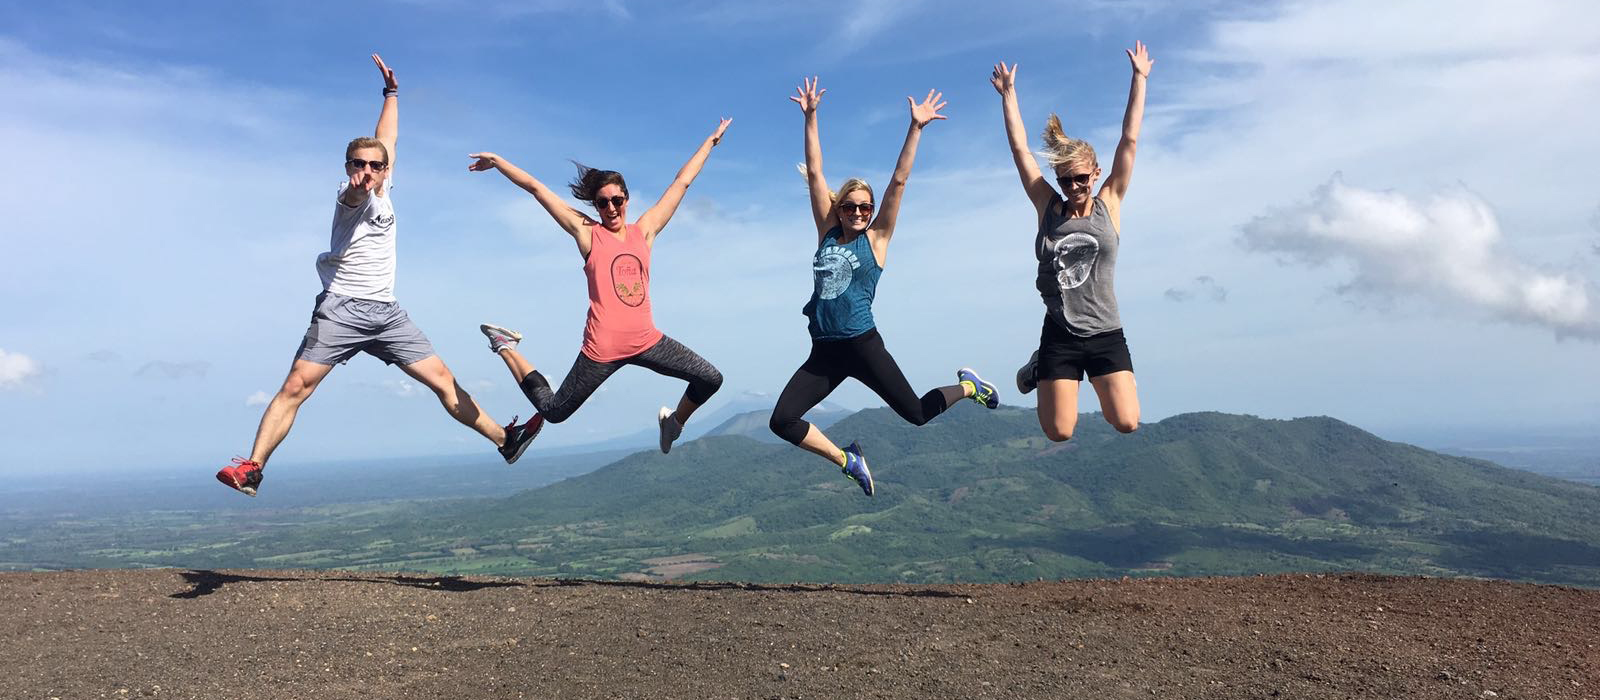 Husker students jump at the top of a scenic area in Nicaragua